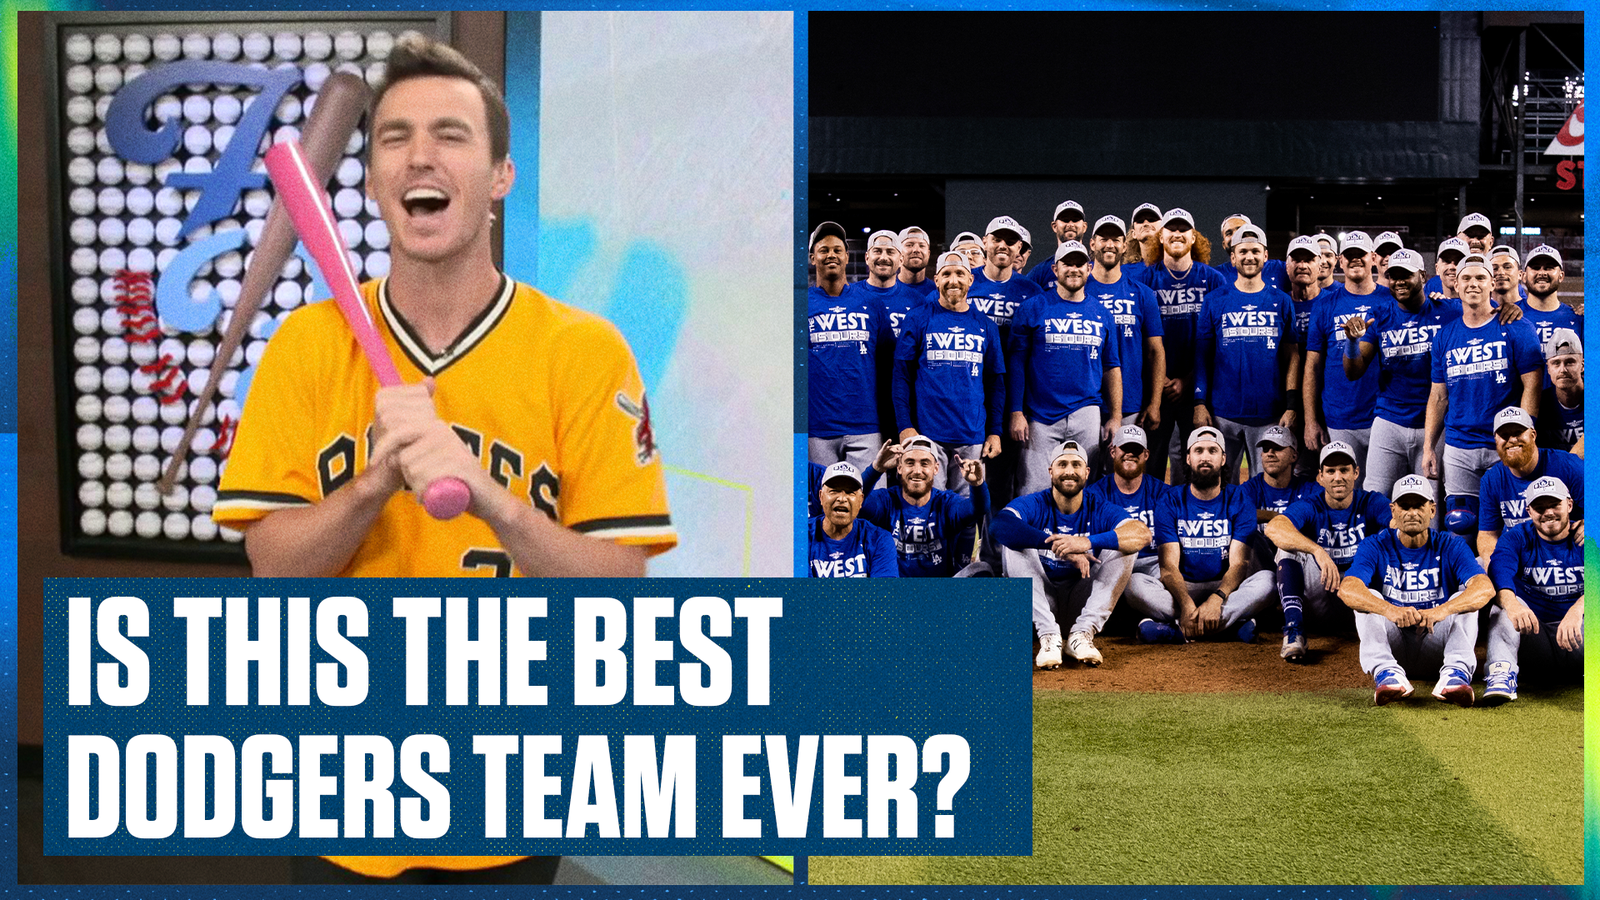 Is this the best Dodgers team ever?